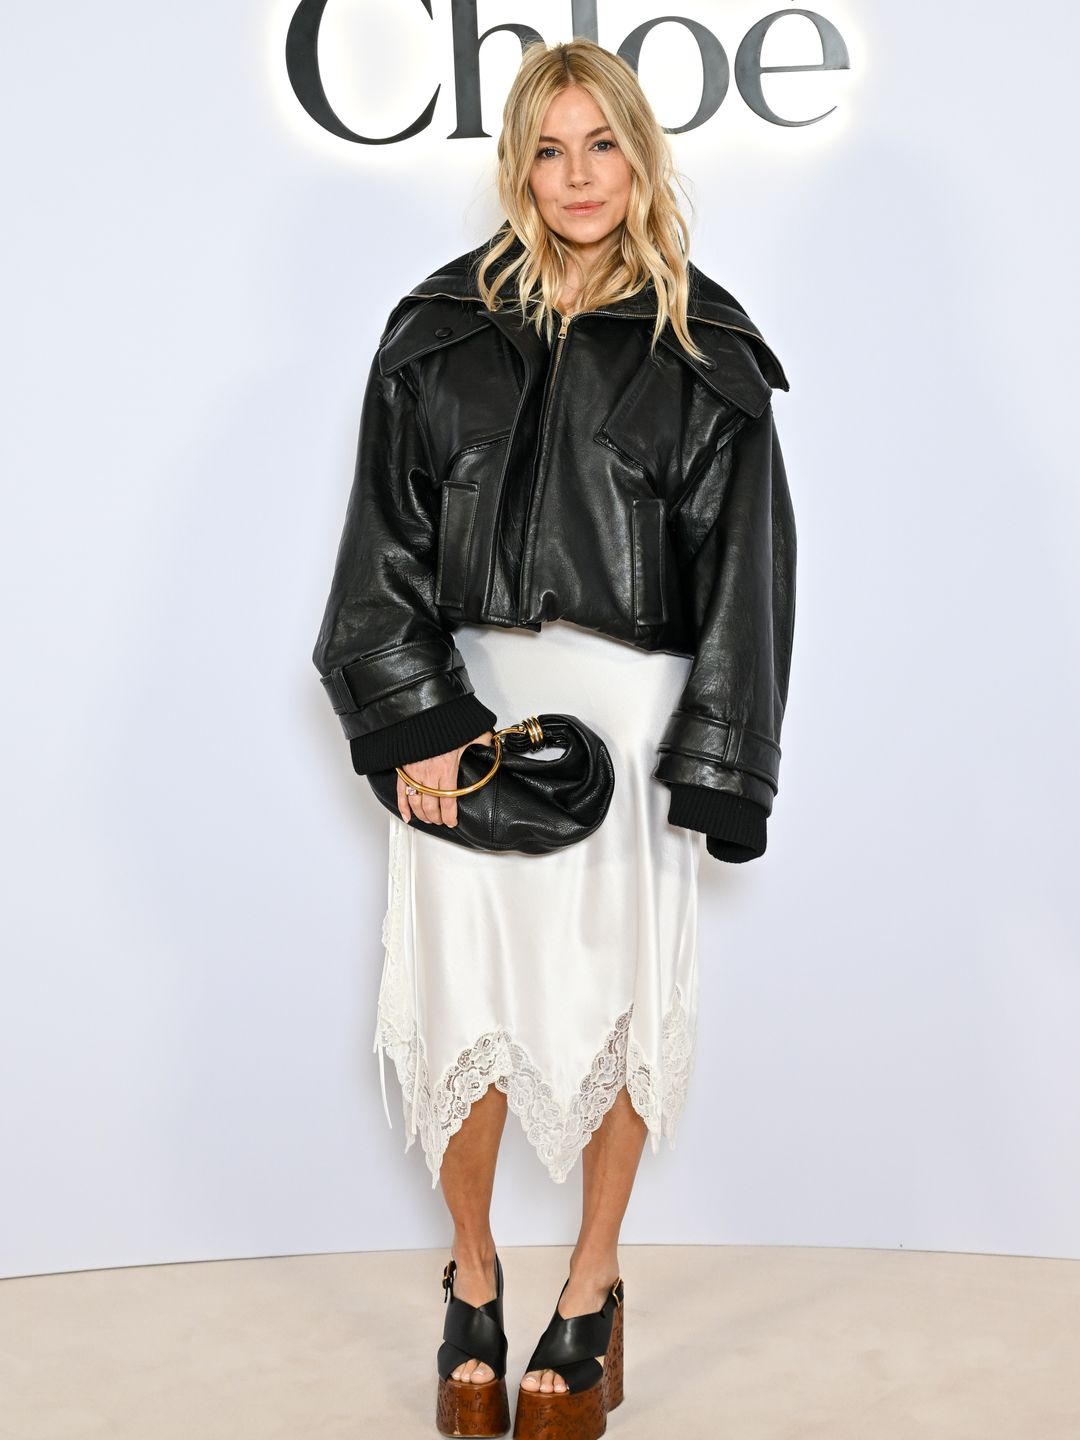 Sienna Miller looked chicer than ever in a white handkerchief slip dress and oversized leather jacket at the Chloé show.